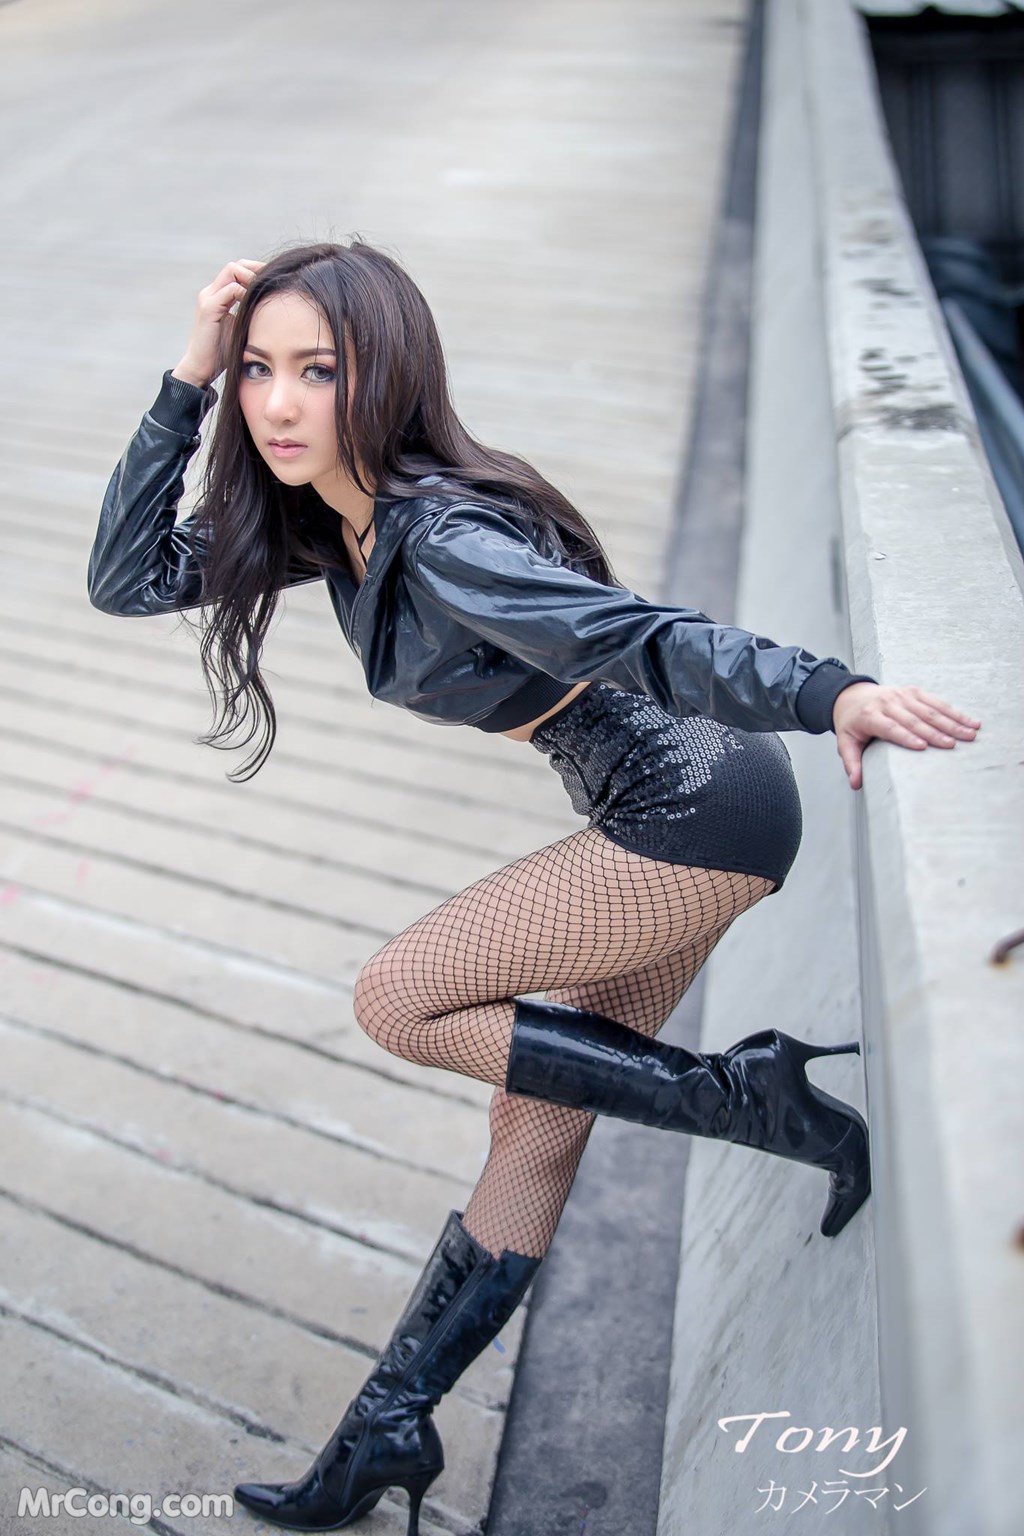 Sexy Kornrachaphat Sugas Jabjai in a bold black outfit (18 photos)